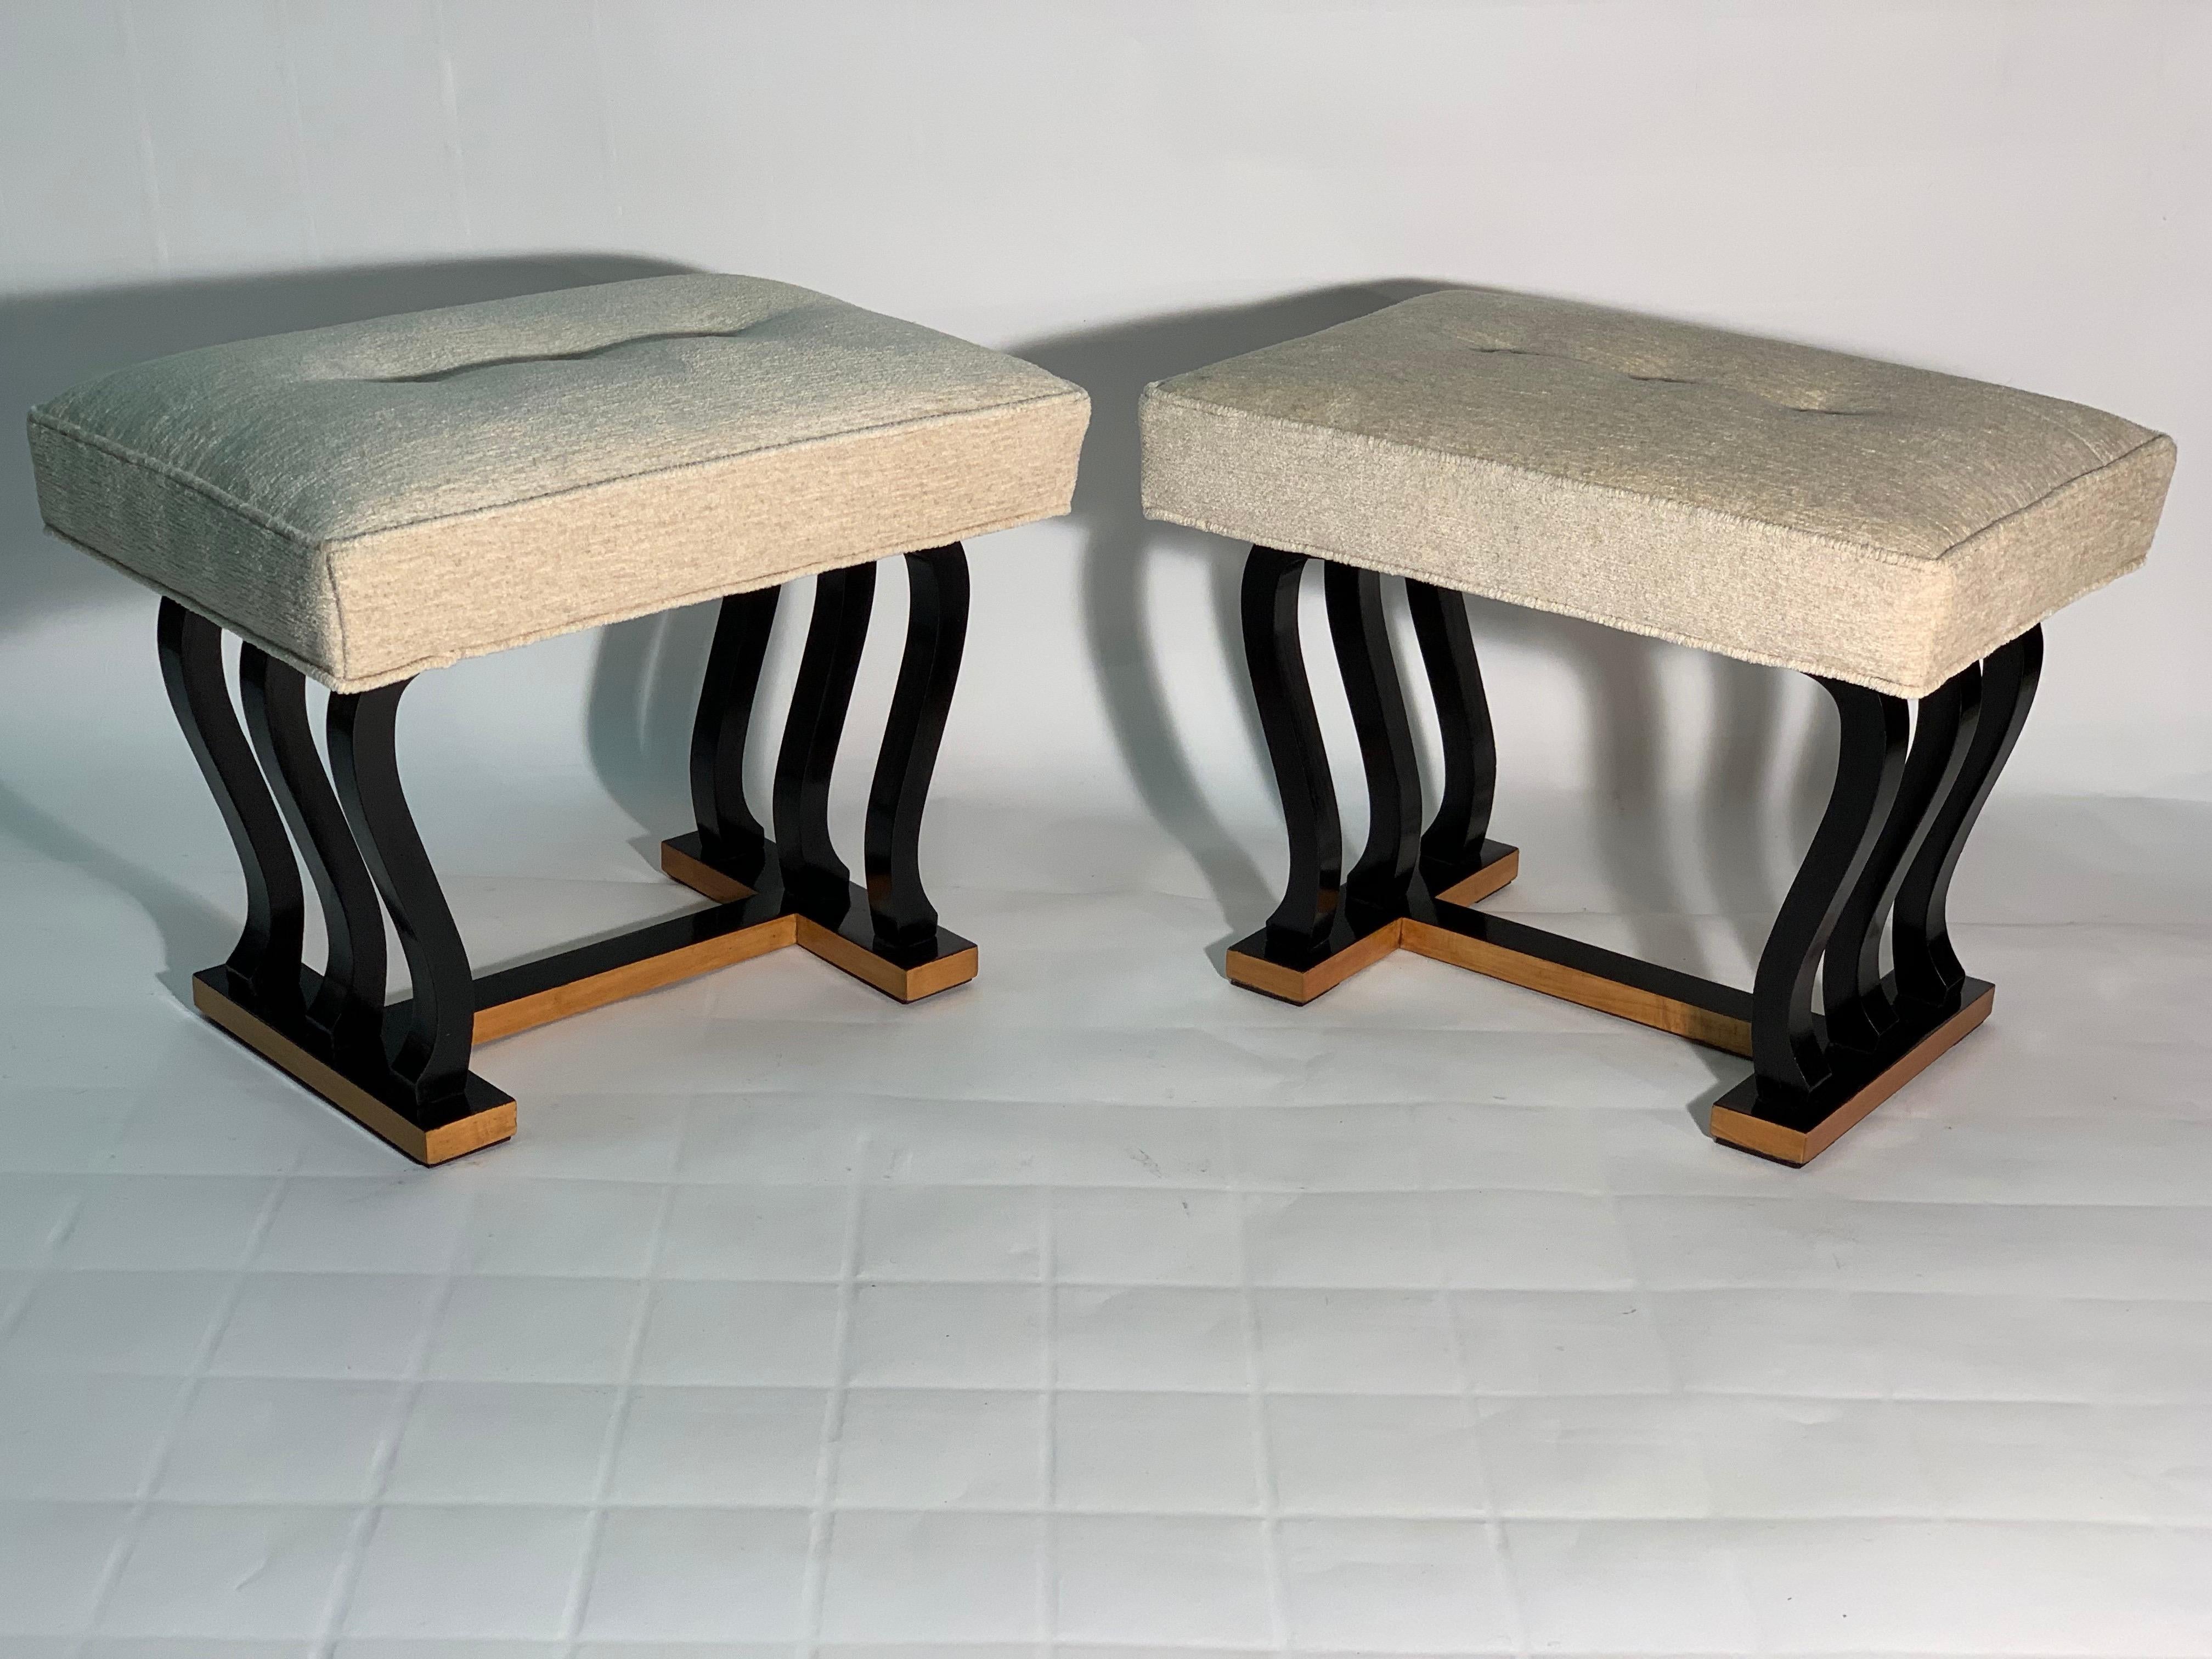 Italian Mid-1940-1950 century modern pair of stools in maples wood and black lacquered maples wood.
Six legs with a curved and sinuous shape support the padded seat newly covered with a beige cotton fabric.
Fagioli Manufacture Florence Italy.